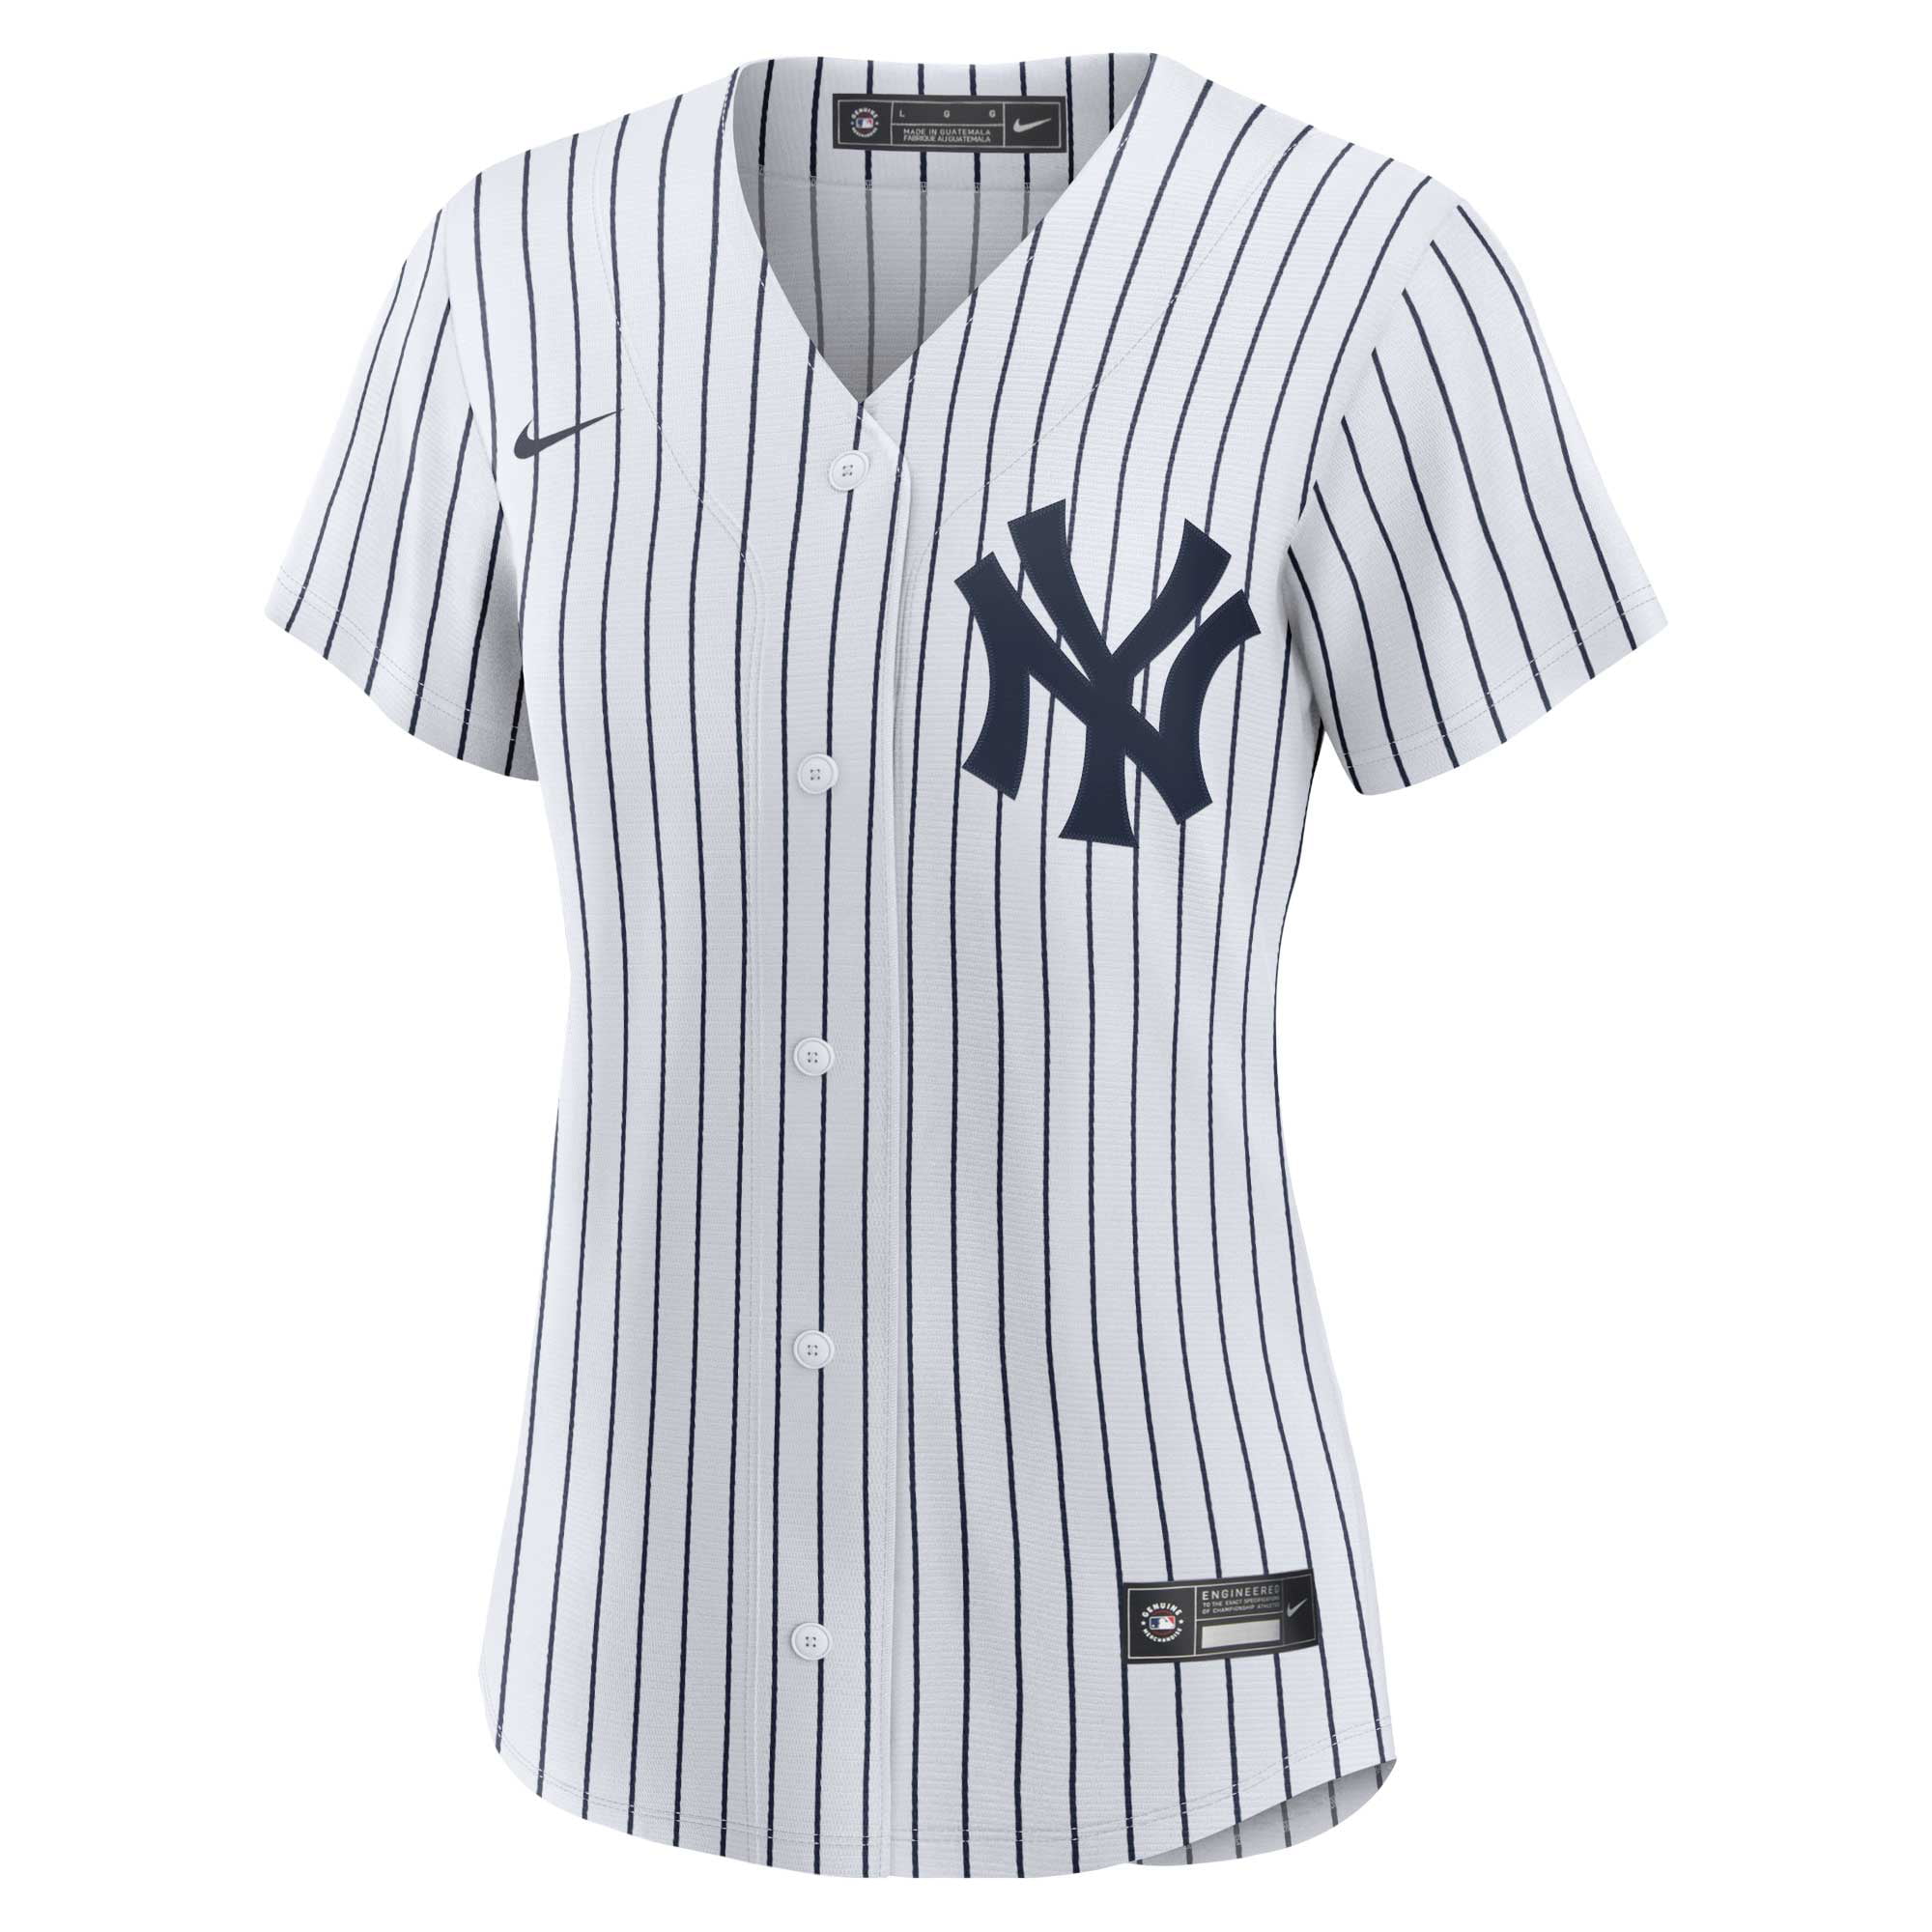 Men's Nike Anthony Rizzo White New York Yankees Home Official Replica Player Jersey, XL